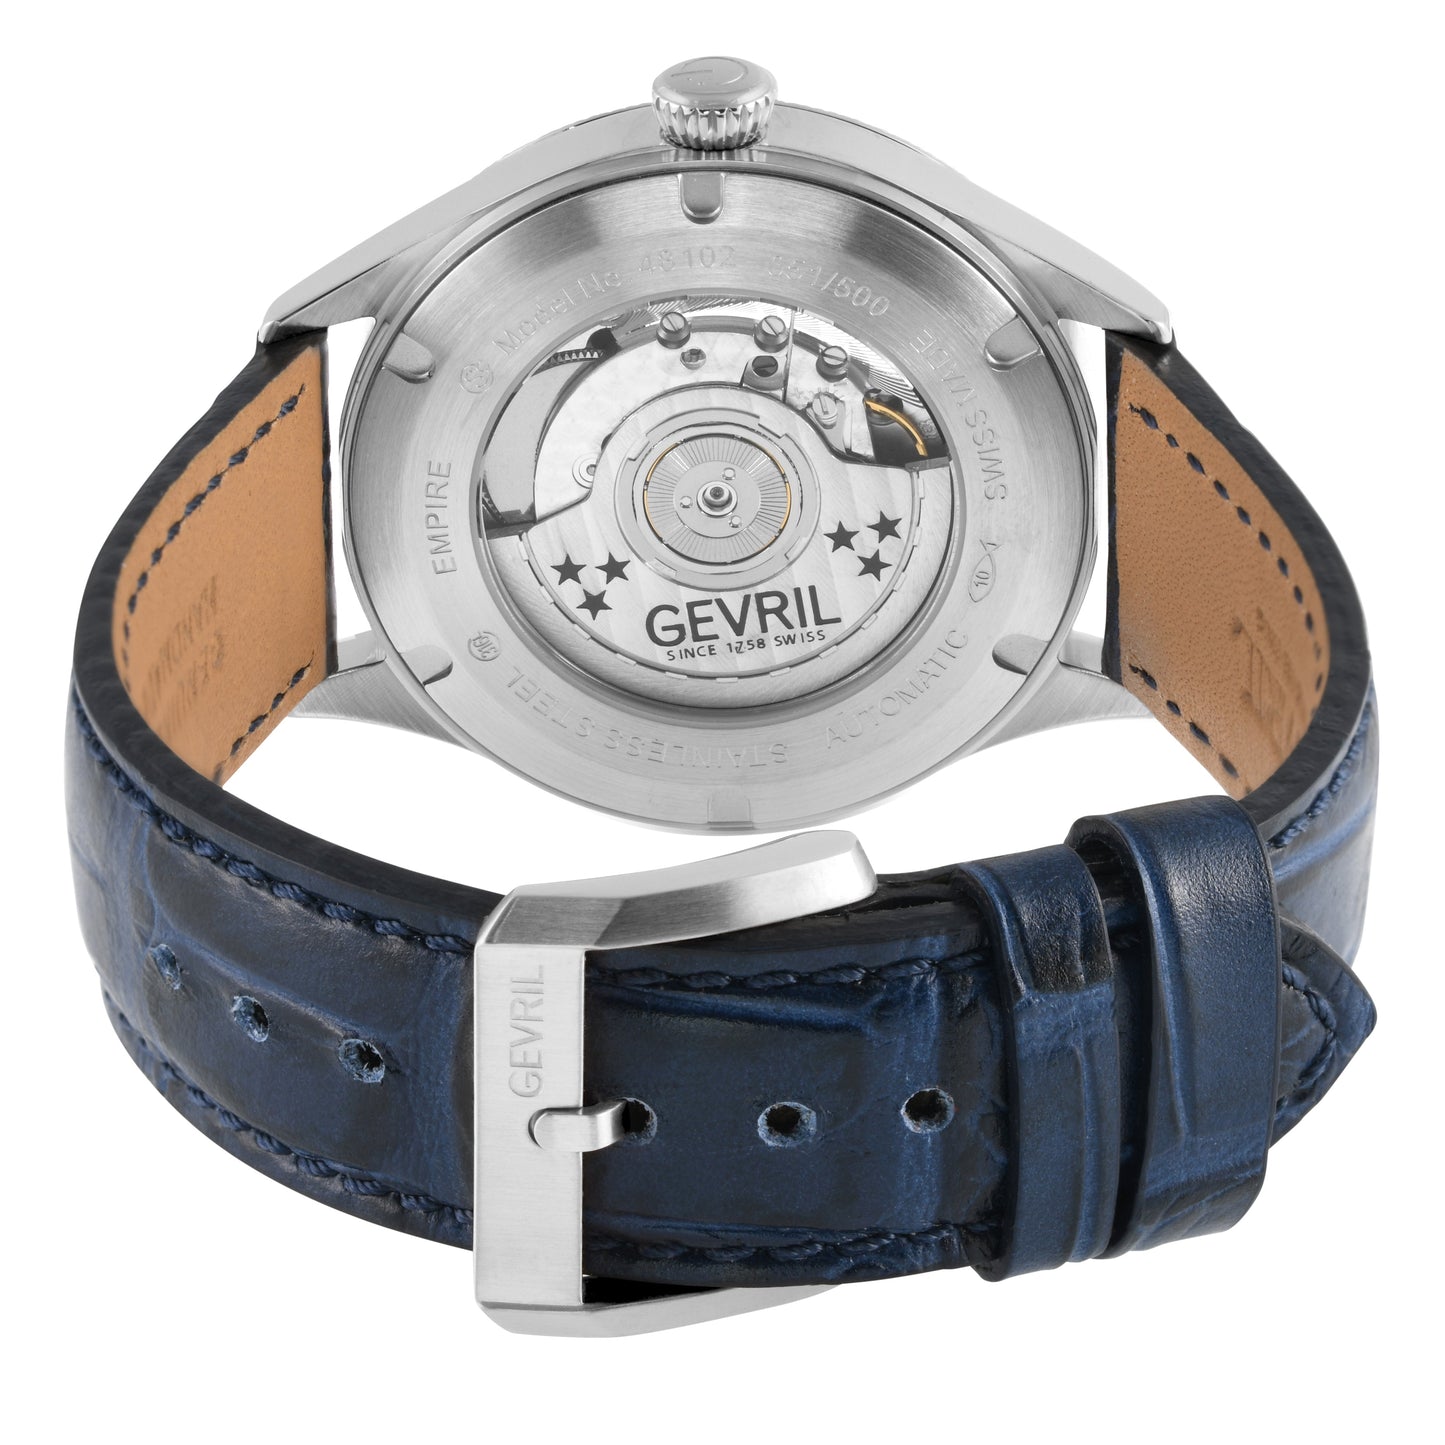 Gevril-Luxury-Swiss-Watches-Gevril Empire-48102